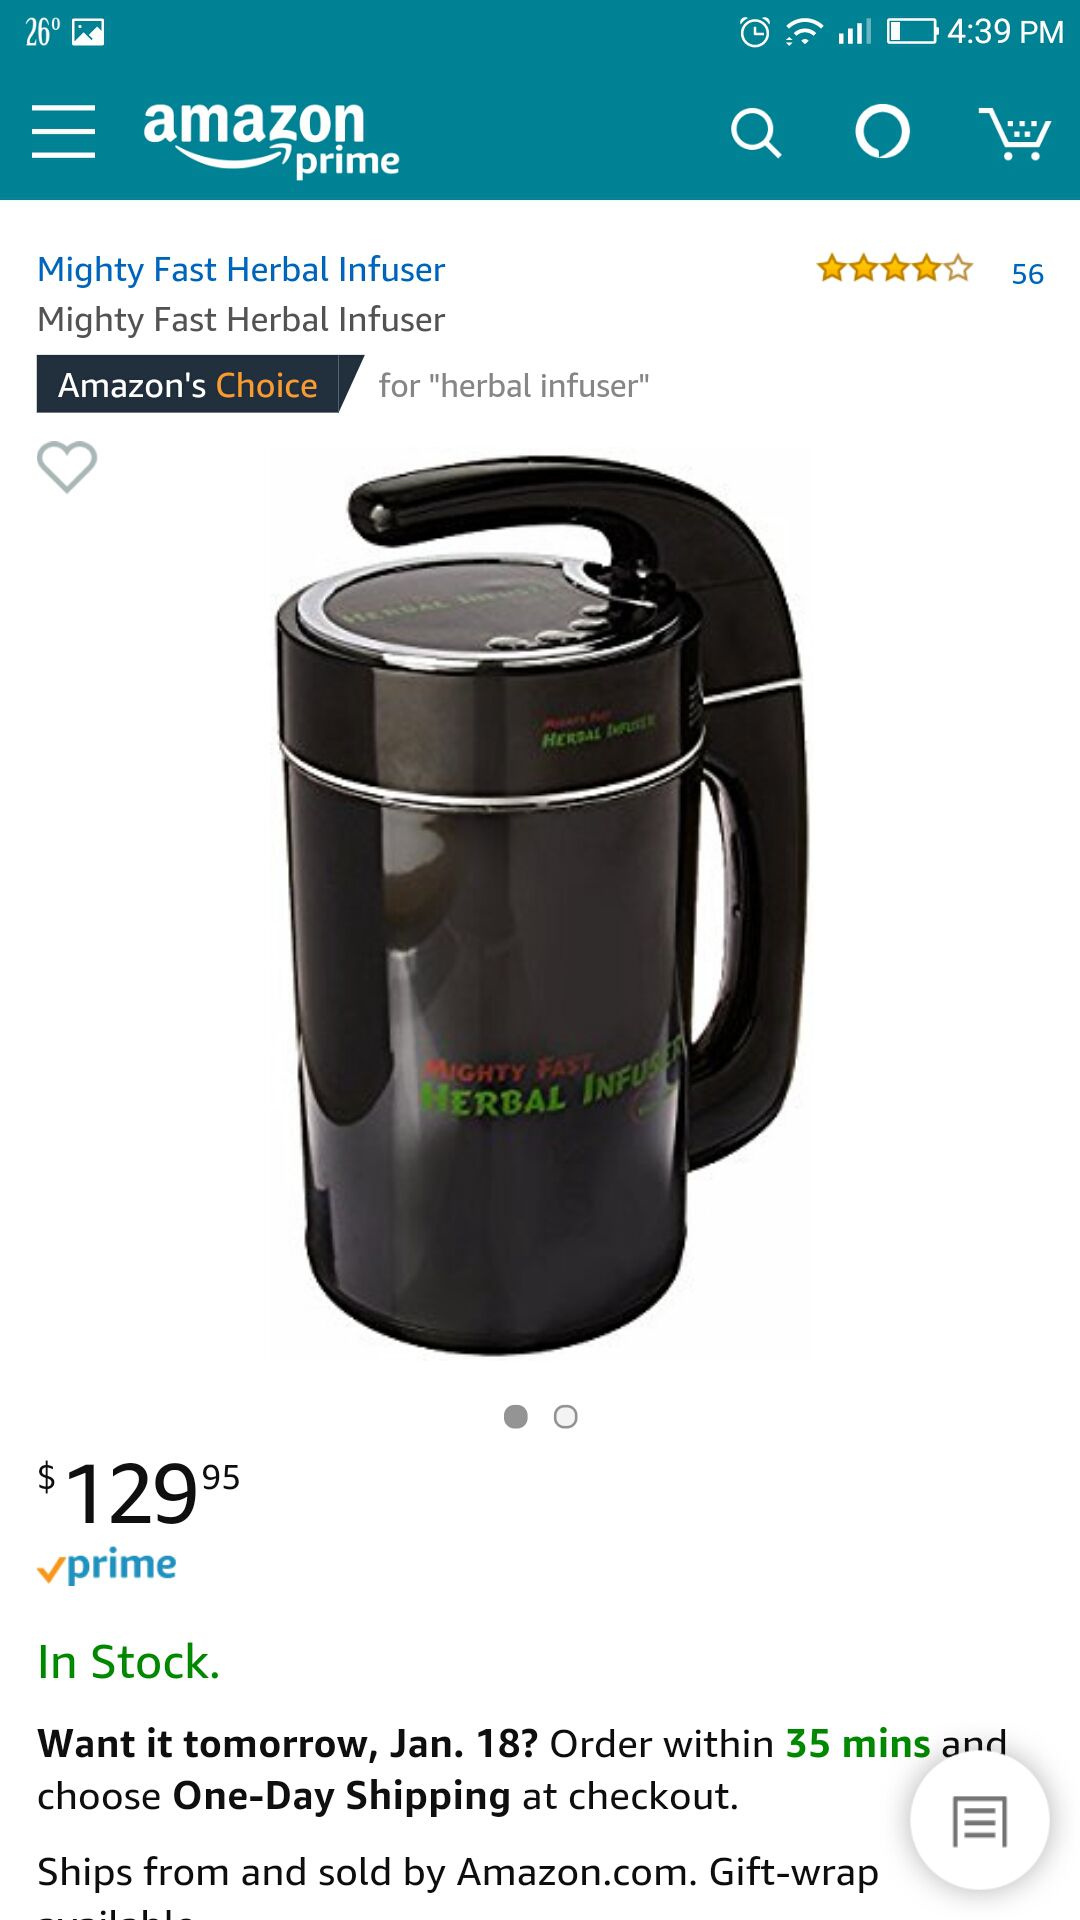 Brand new Mighty fast herbal infuser